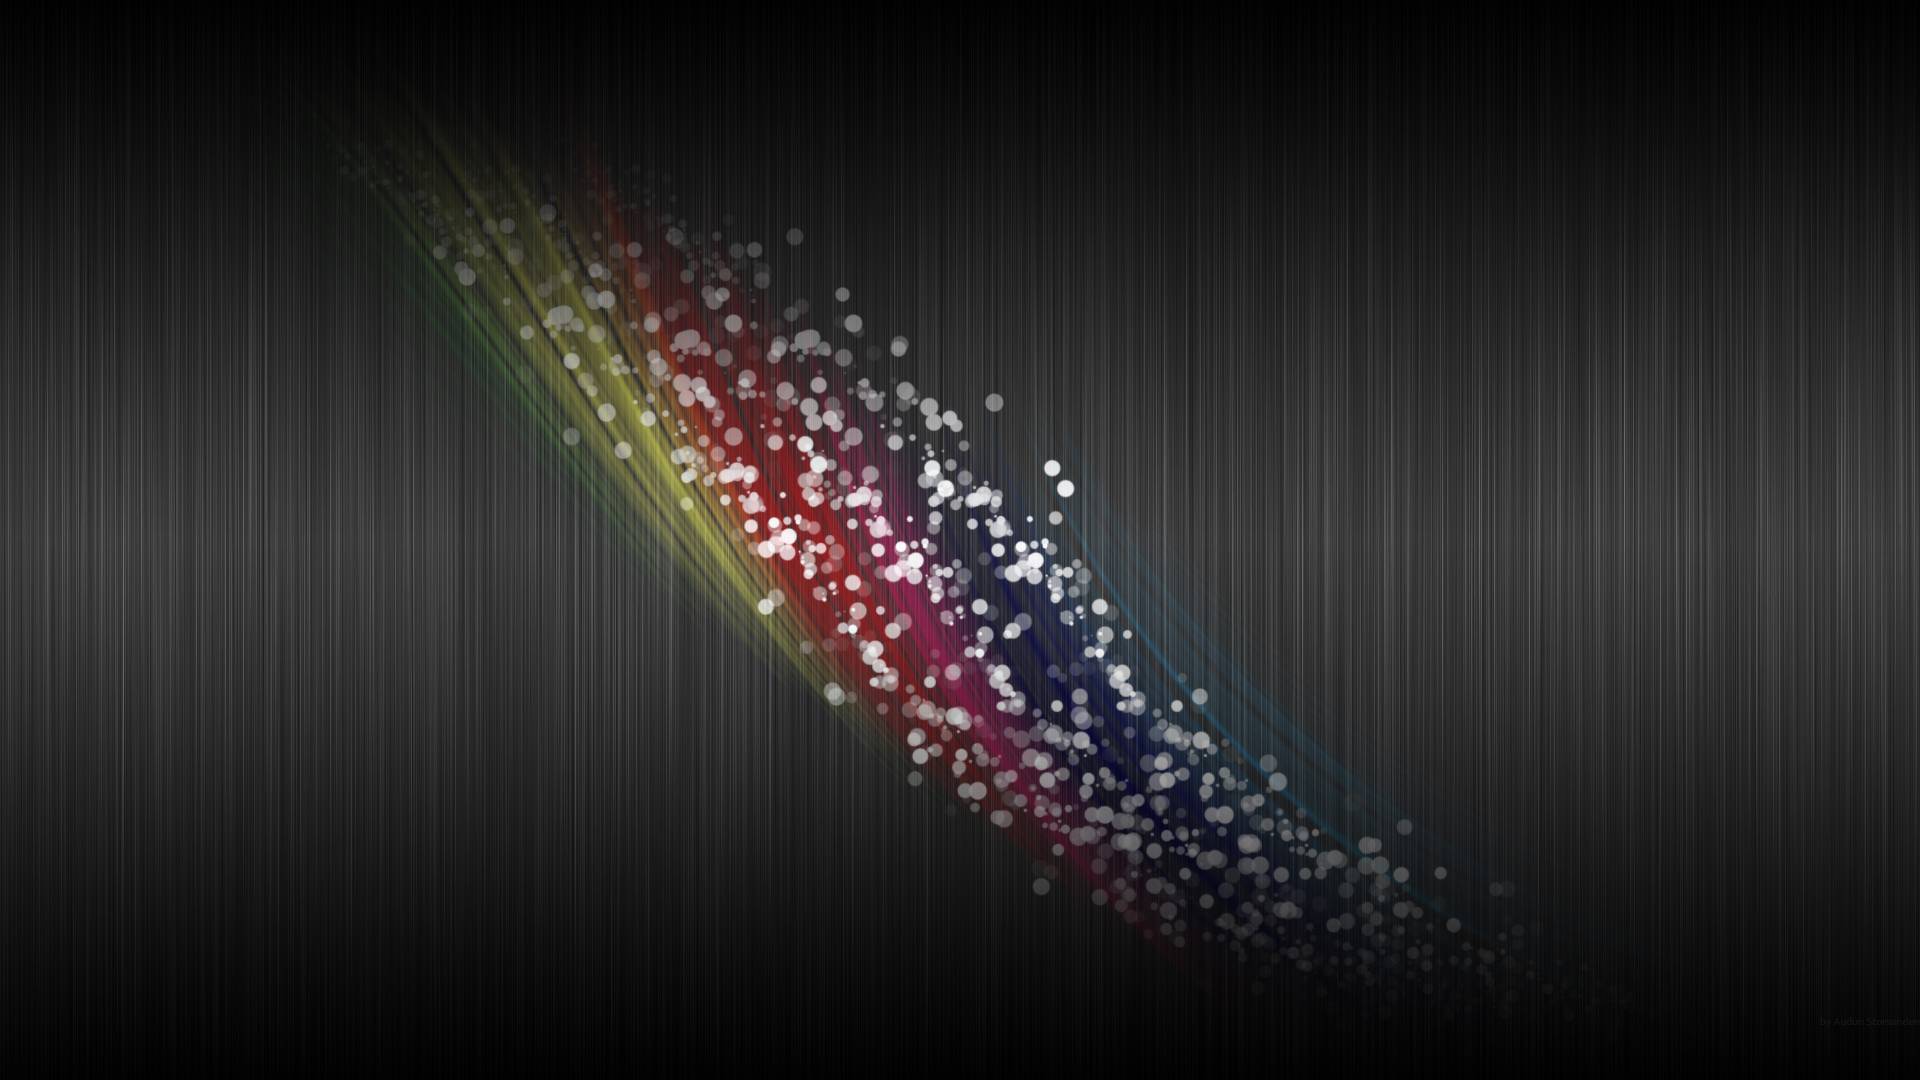 Wallpapers black background rainbow colors stripes on the desktop